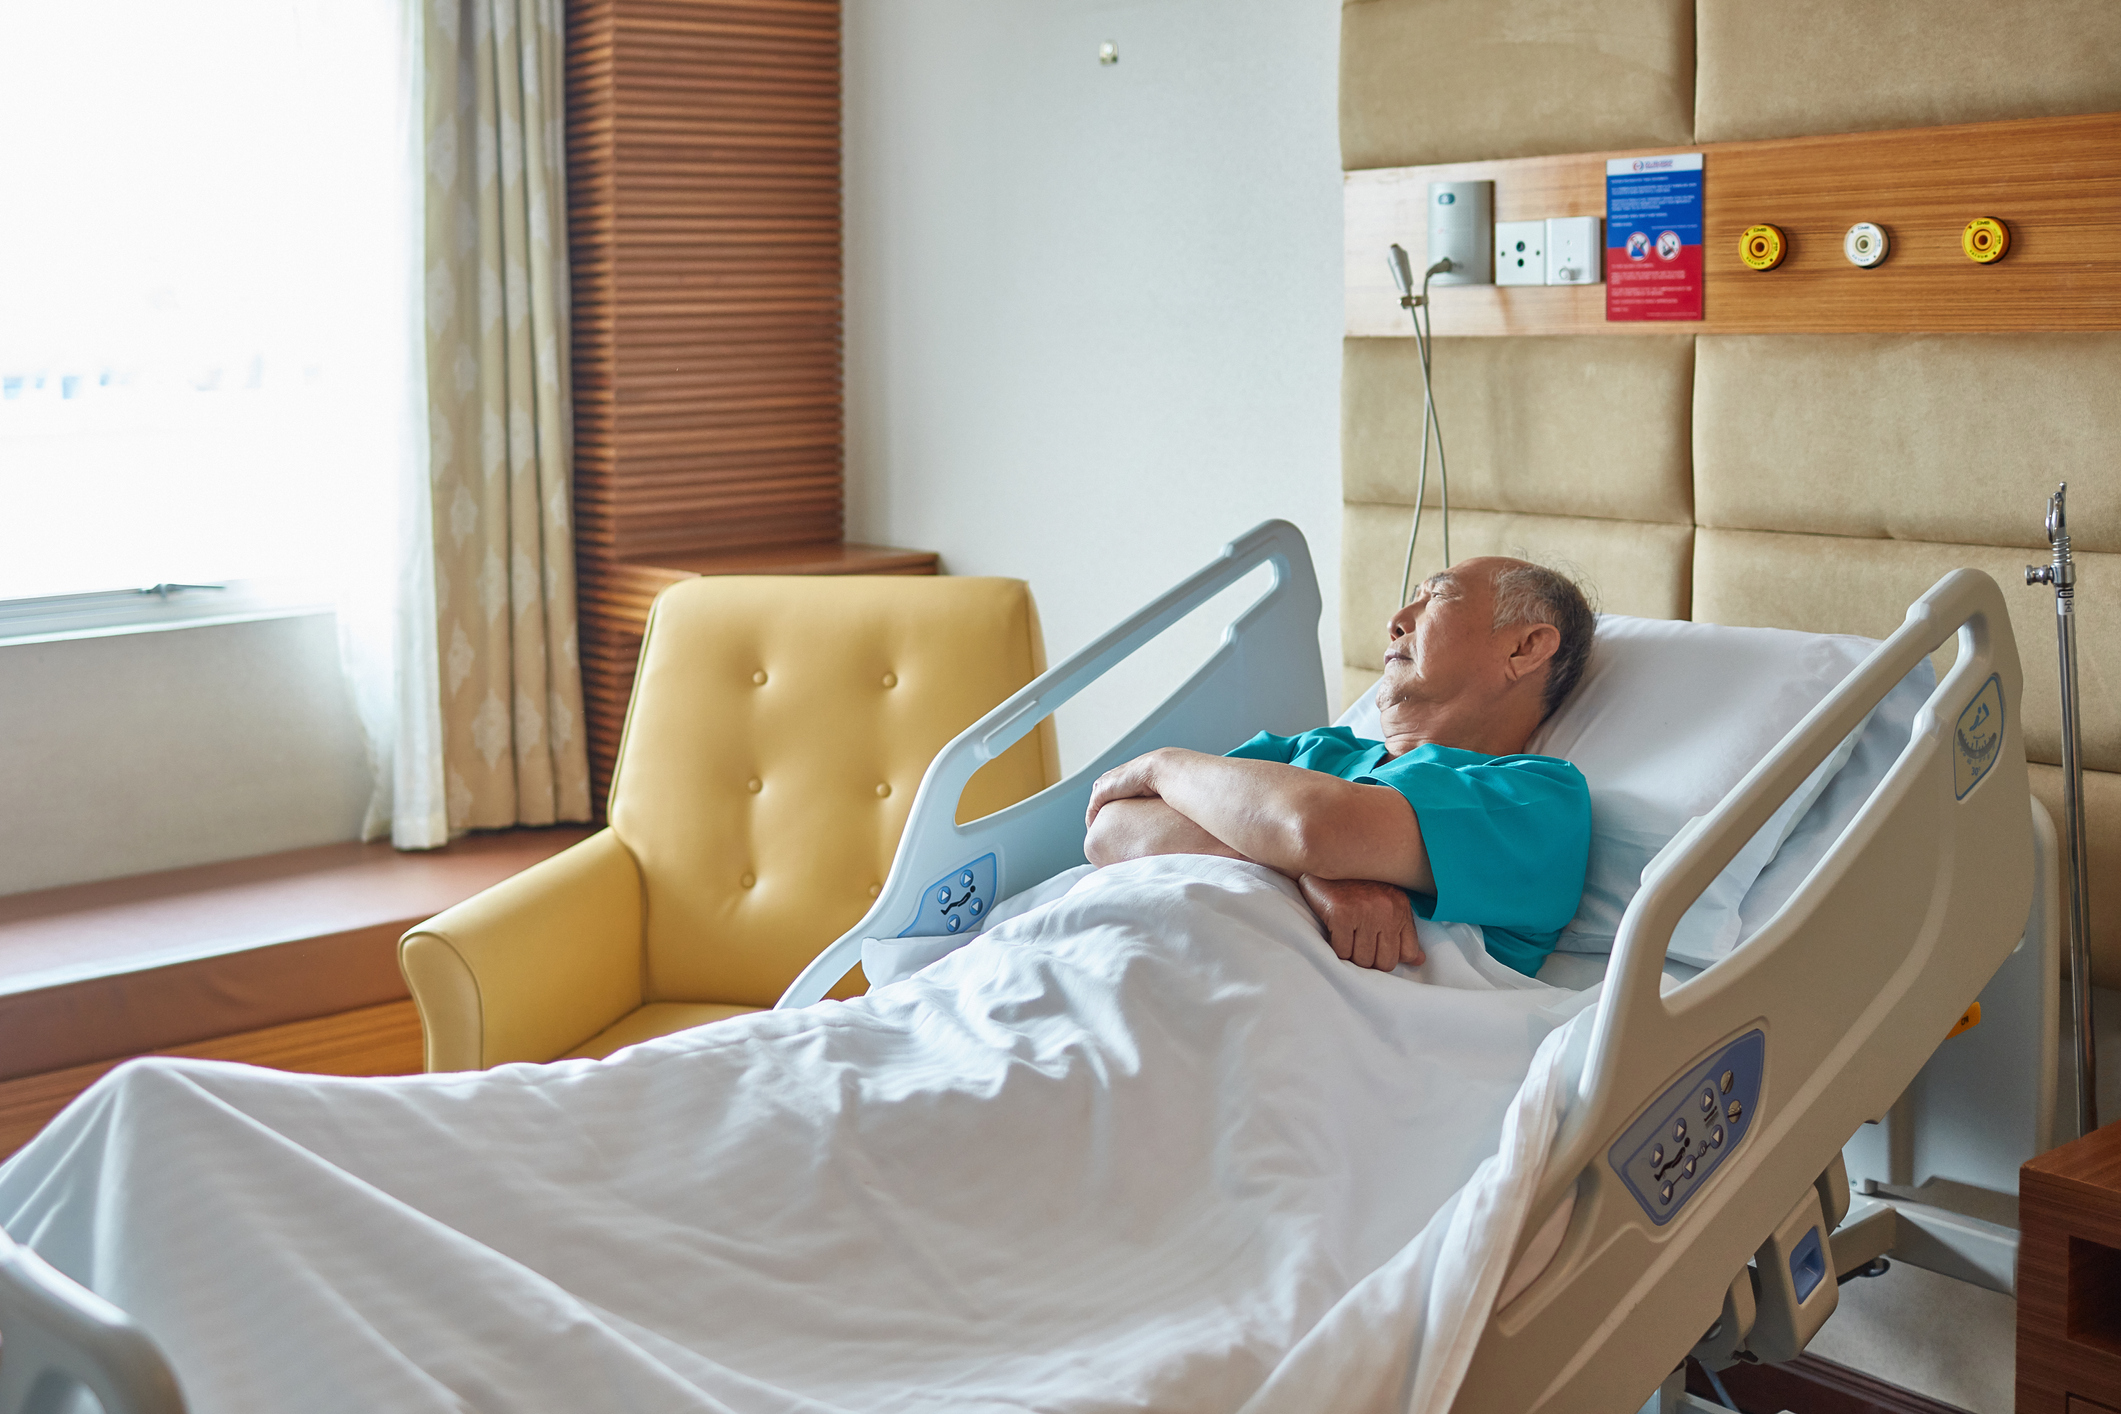 Researchers are gaining insight into the causes behind hospital delirium in the elderly.